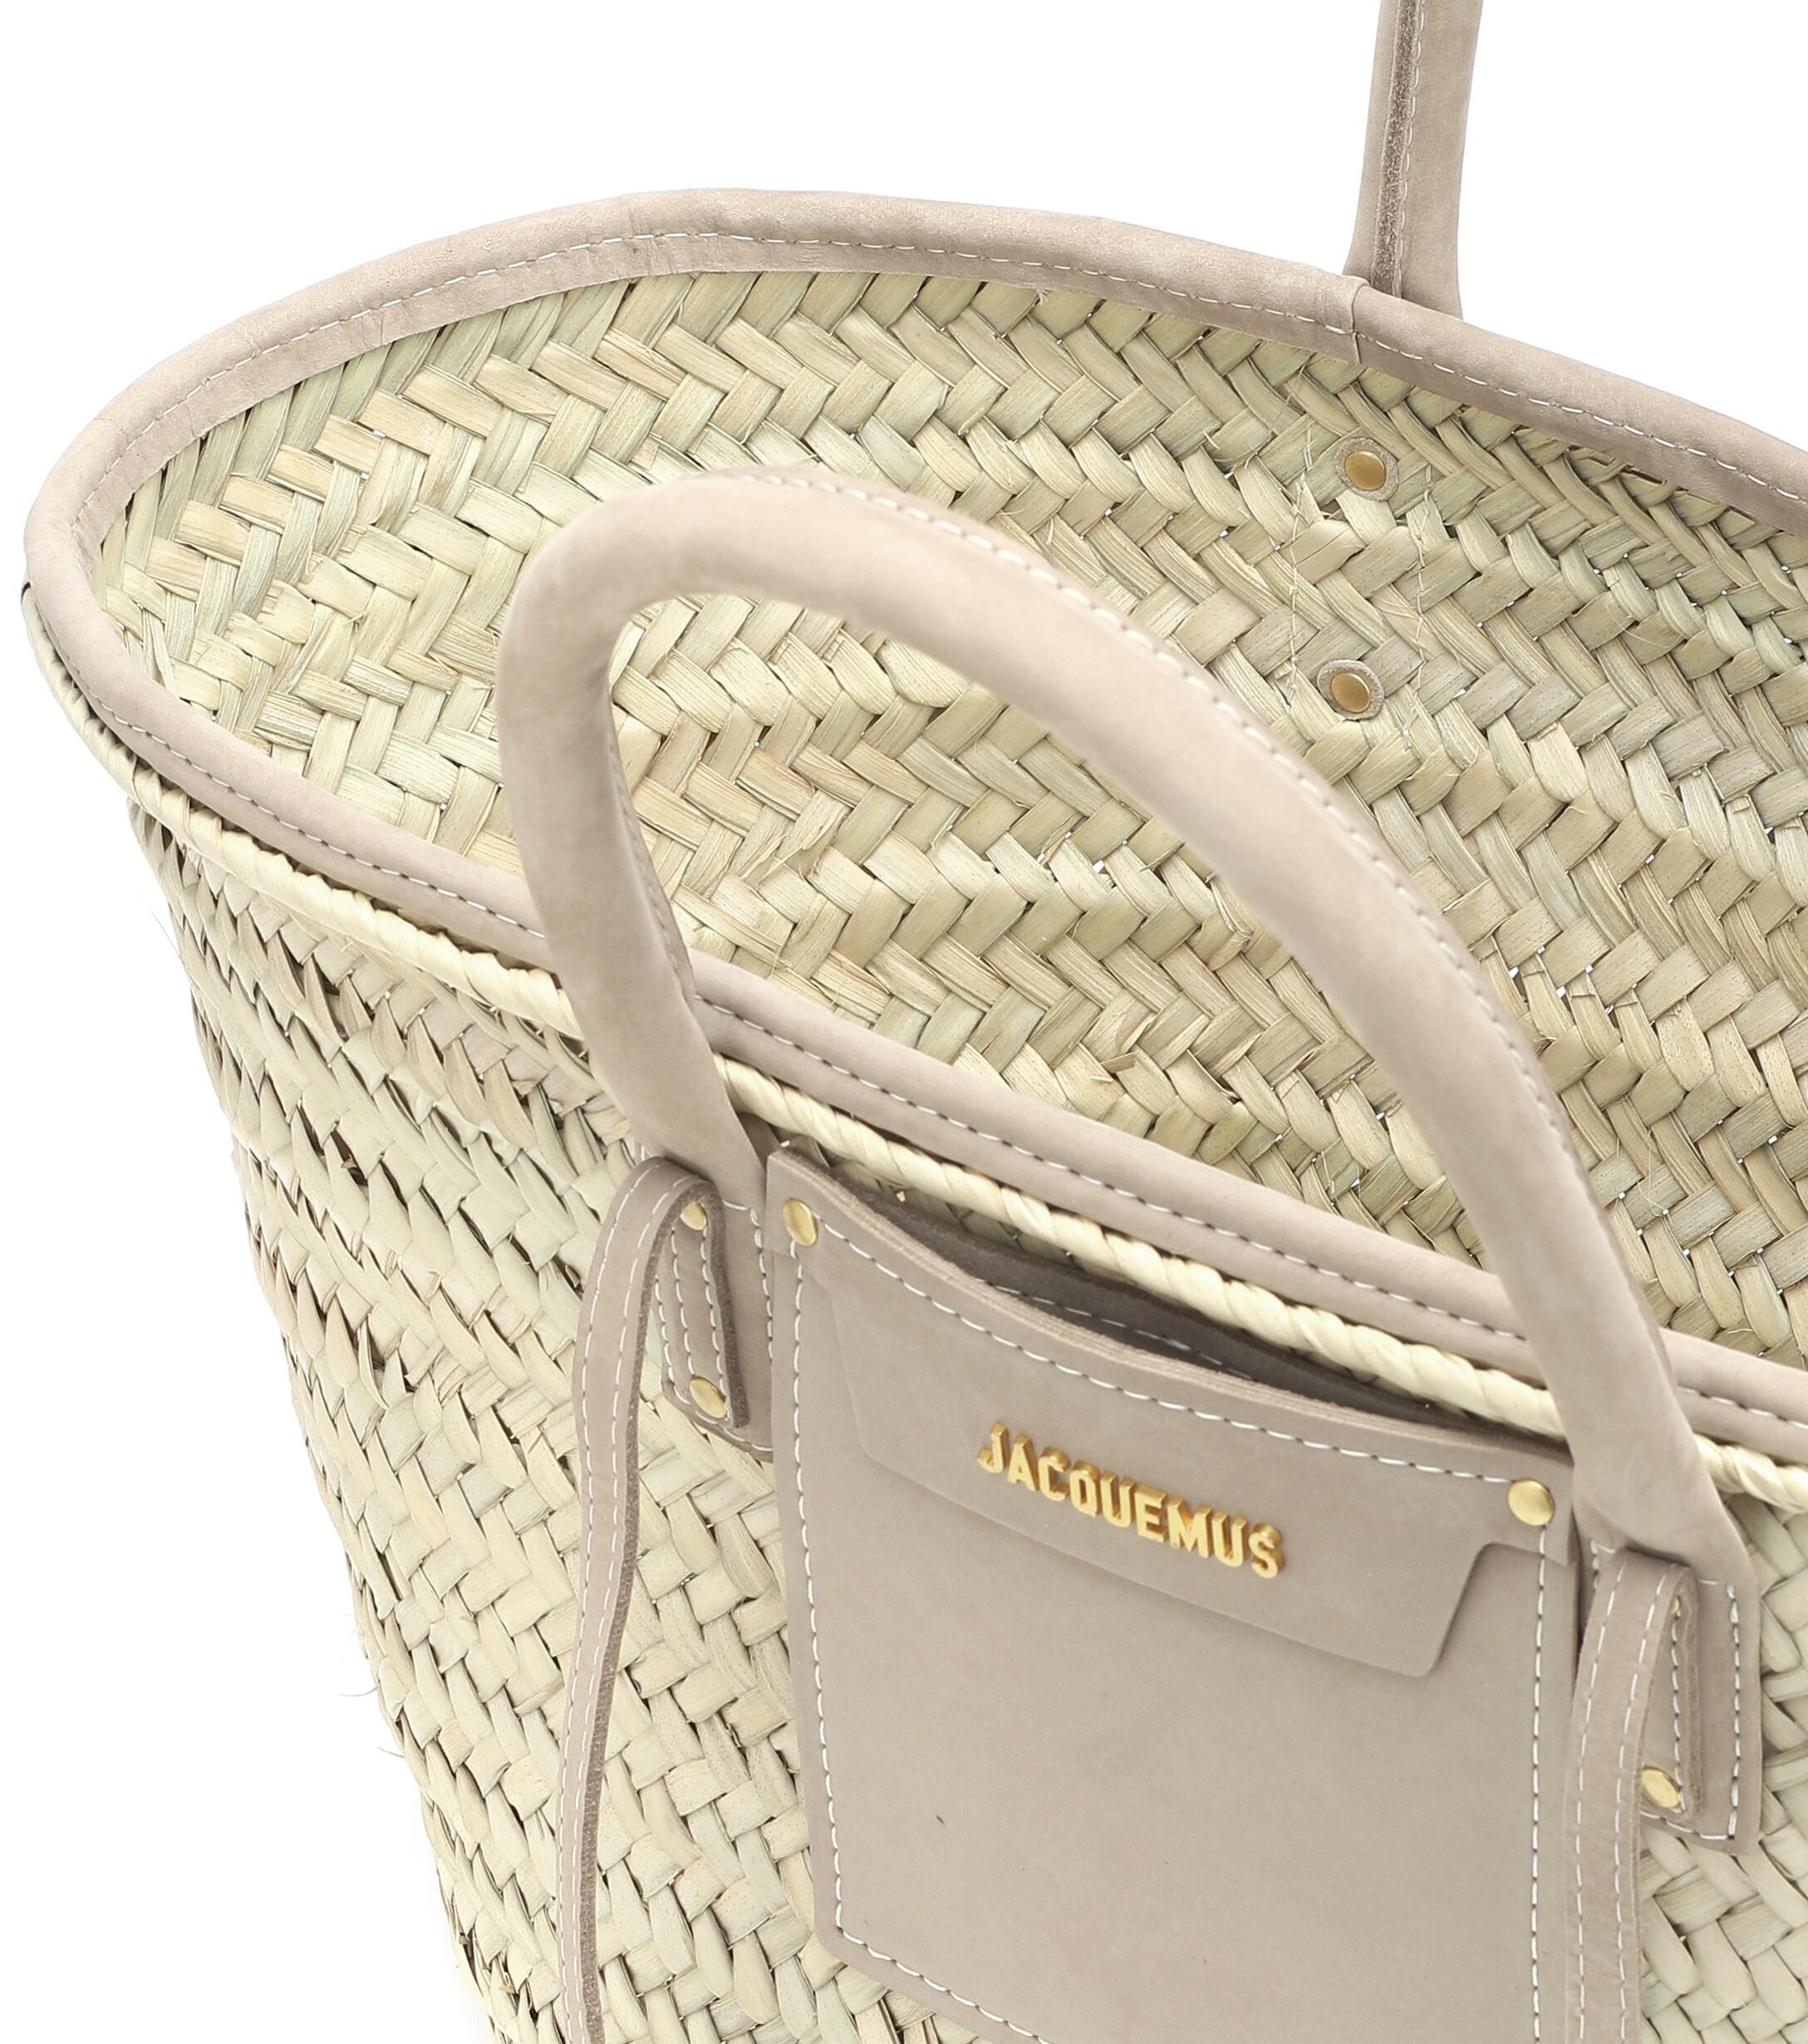 Jacquemus Leather Le Panier Soleil Straw Tote in Beige (Natural) | Lyst